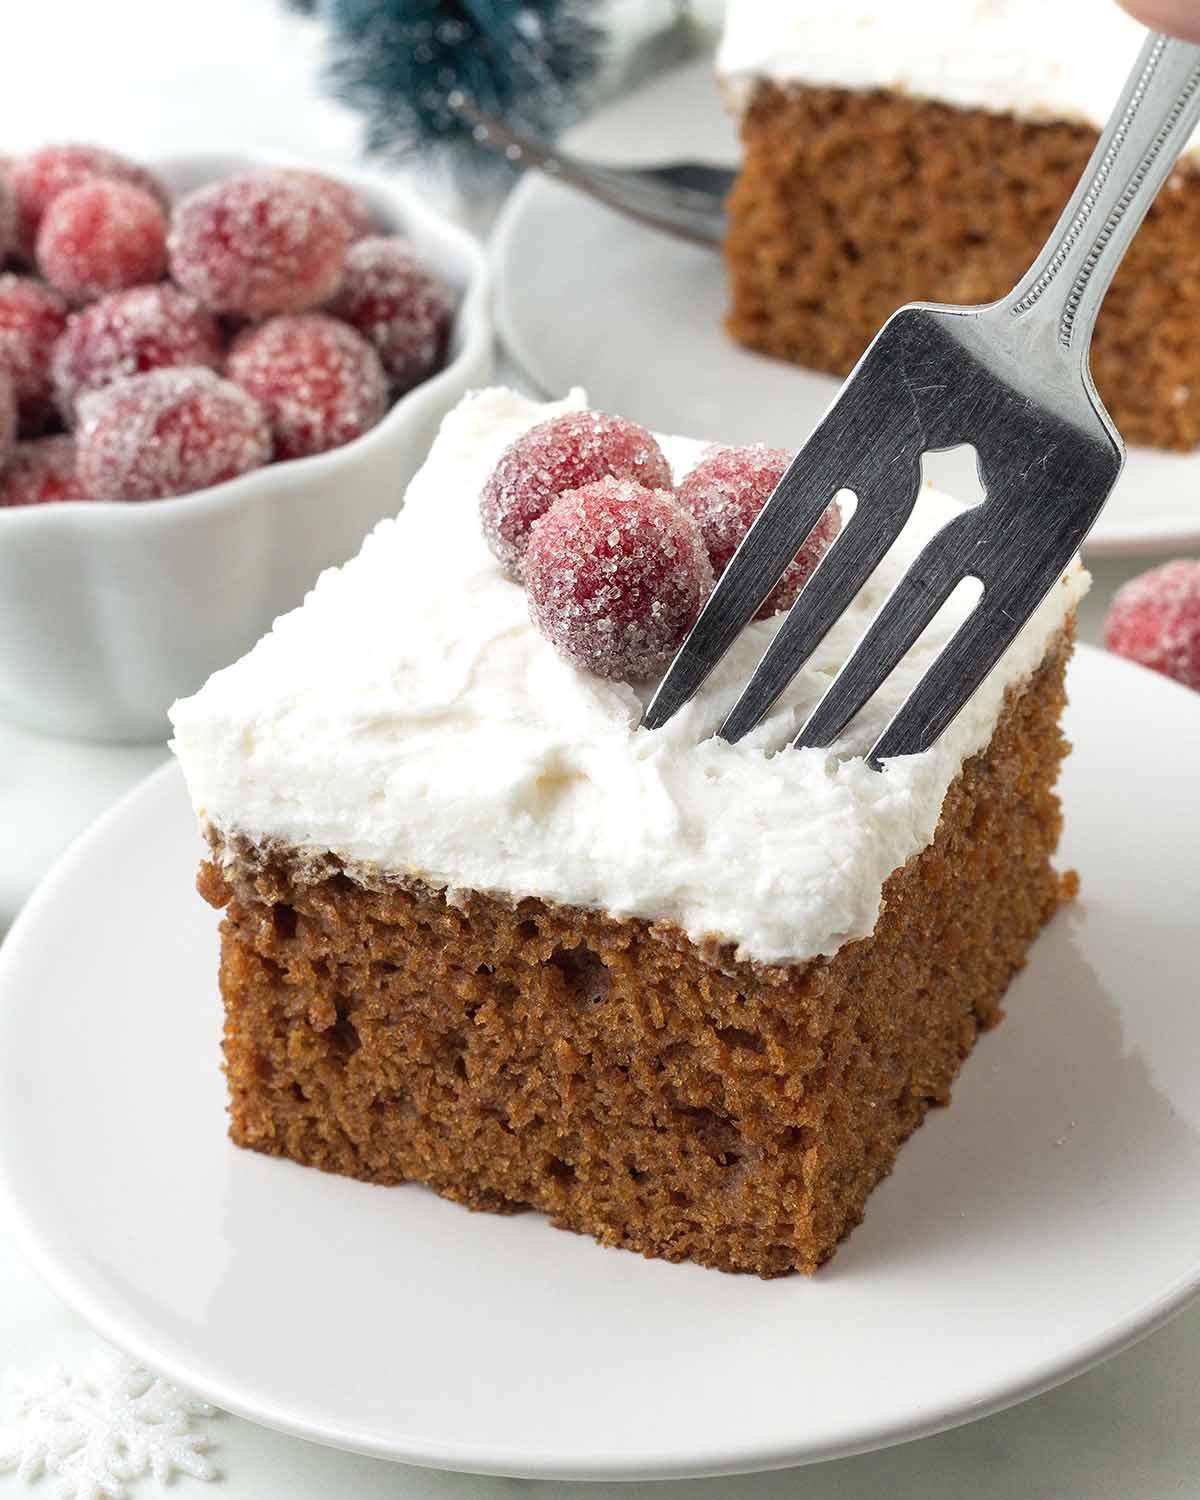 A hand holding a fork that is digging into a square of frosted vegan gingerbread cake.